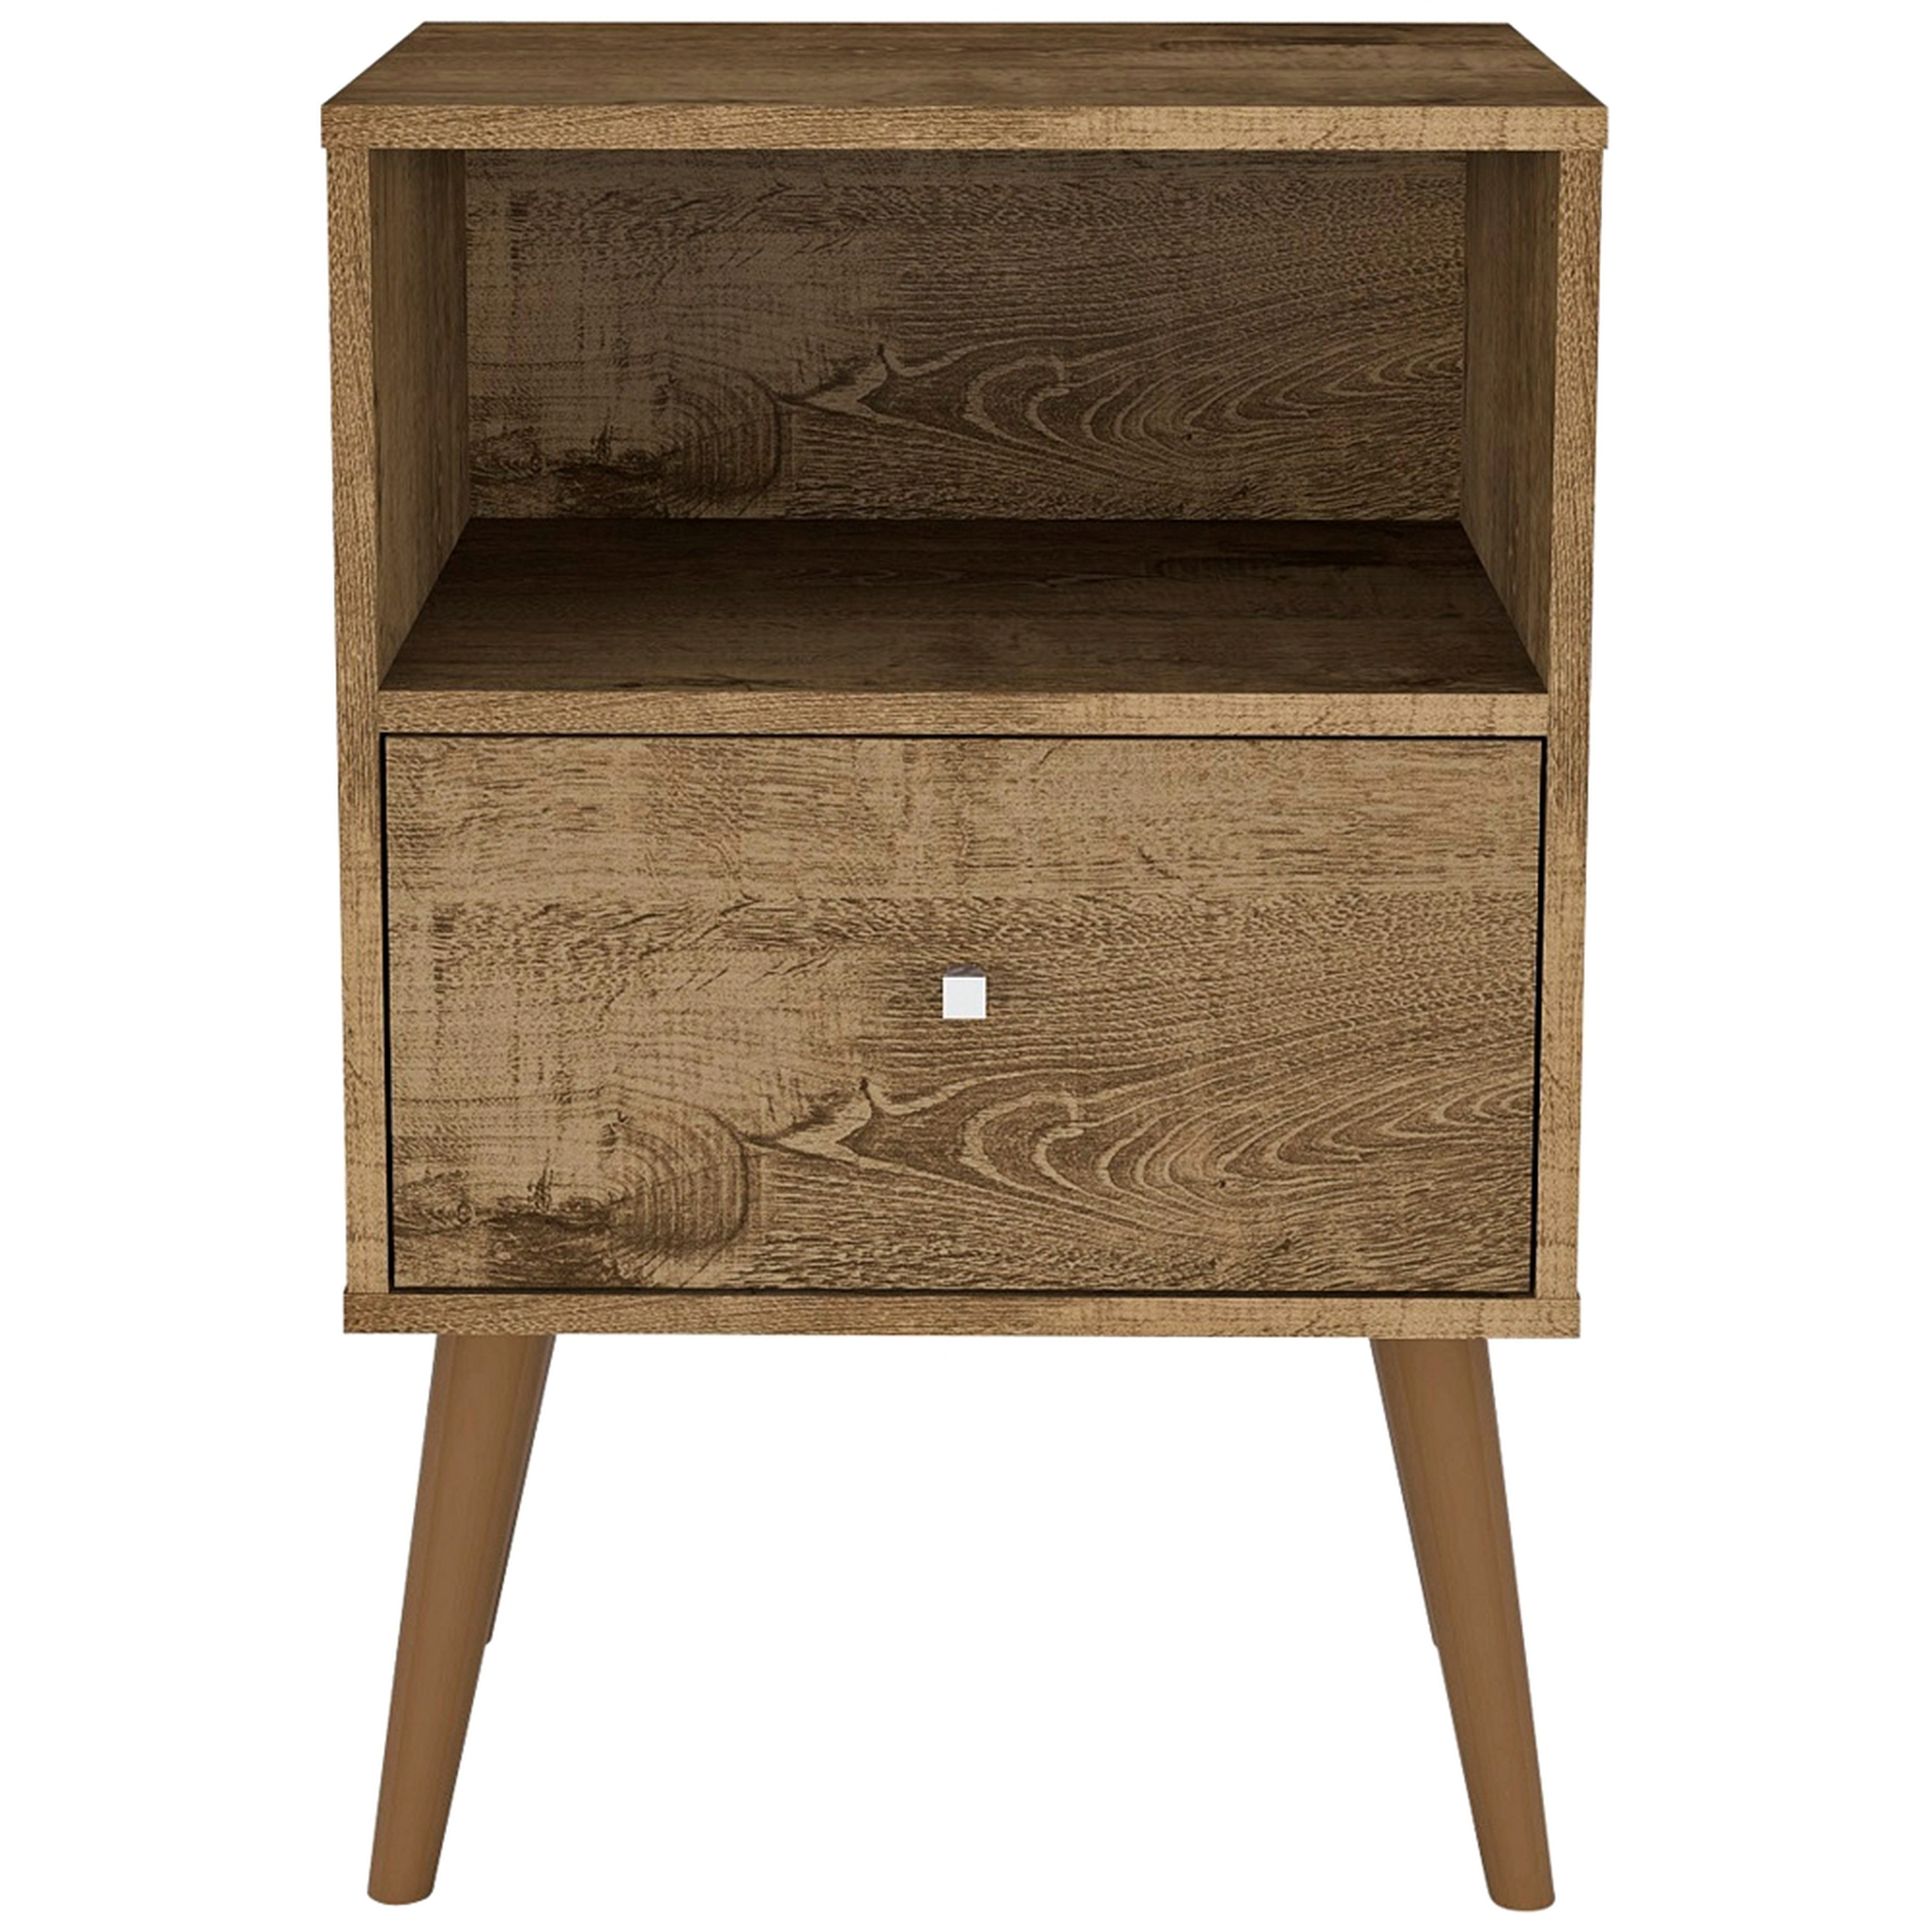 Liberty 17 3/4" Wide Rustic Brown 1-Drawer Wood Nightstand - Style # 69T40 - Lamps Plus